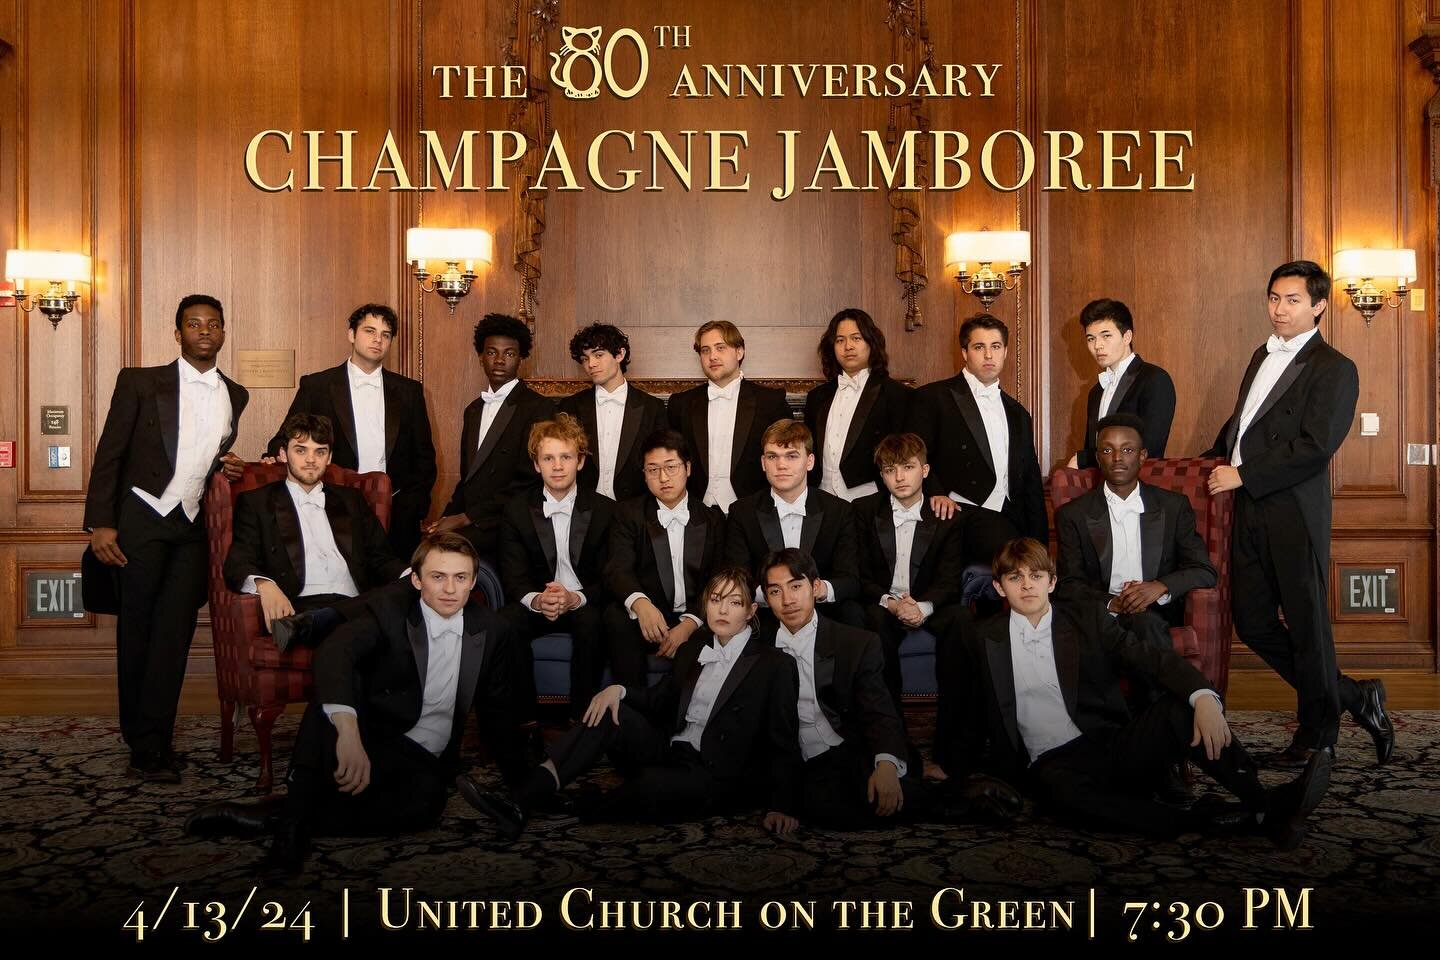 80 years in the making&hellip;

The Alley Cats present the 80th anniversary Champagne Jamboree.

Tickets drop TOMORROW at 5 PM. Featuring a dance number, a special guest soloist, and MANY thrown shoes, you don&rsquo;t want to miss this.

4/13. 7:30 P